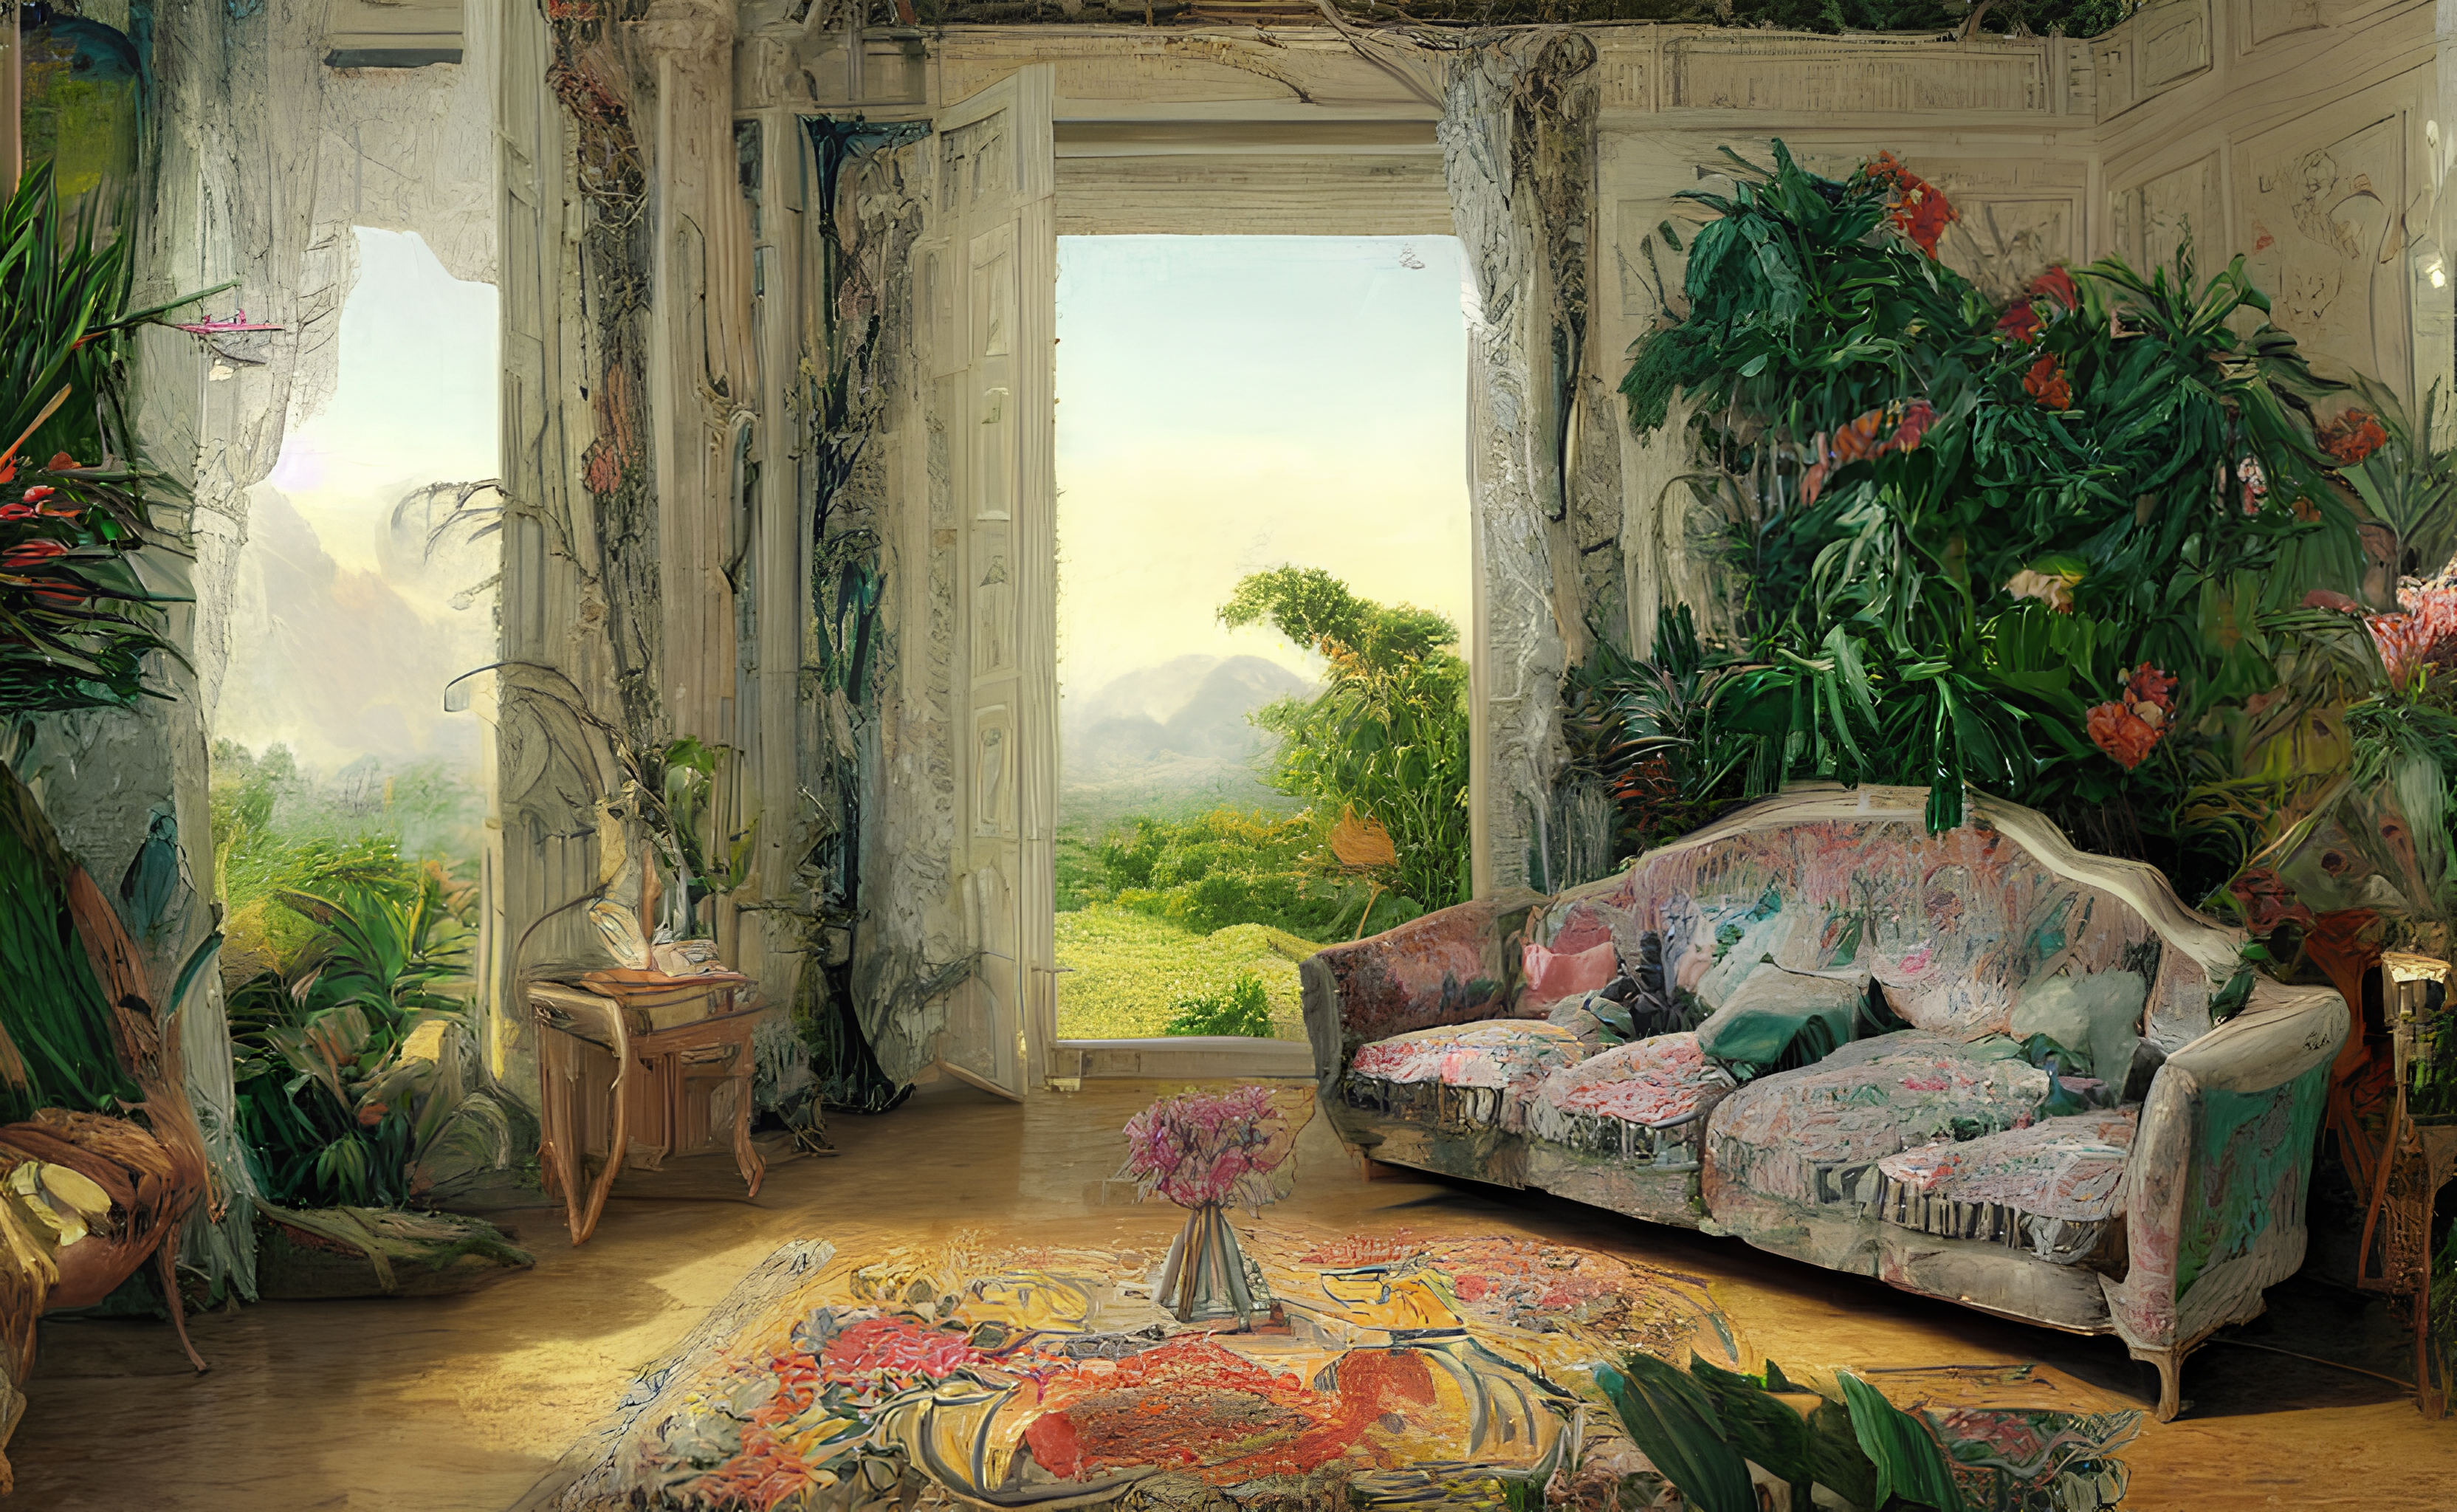 A painting of a sofa and other furniture in a living room along with lots of overgrown furniture.